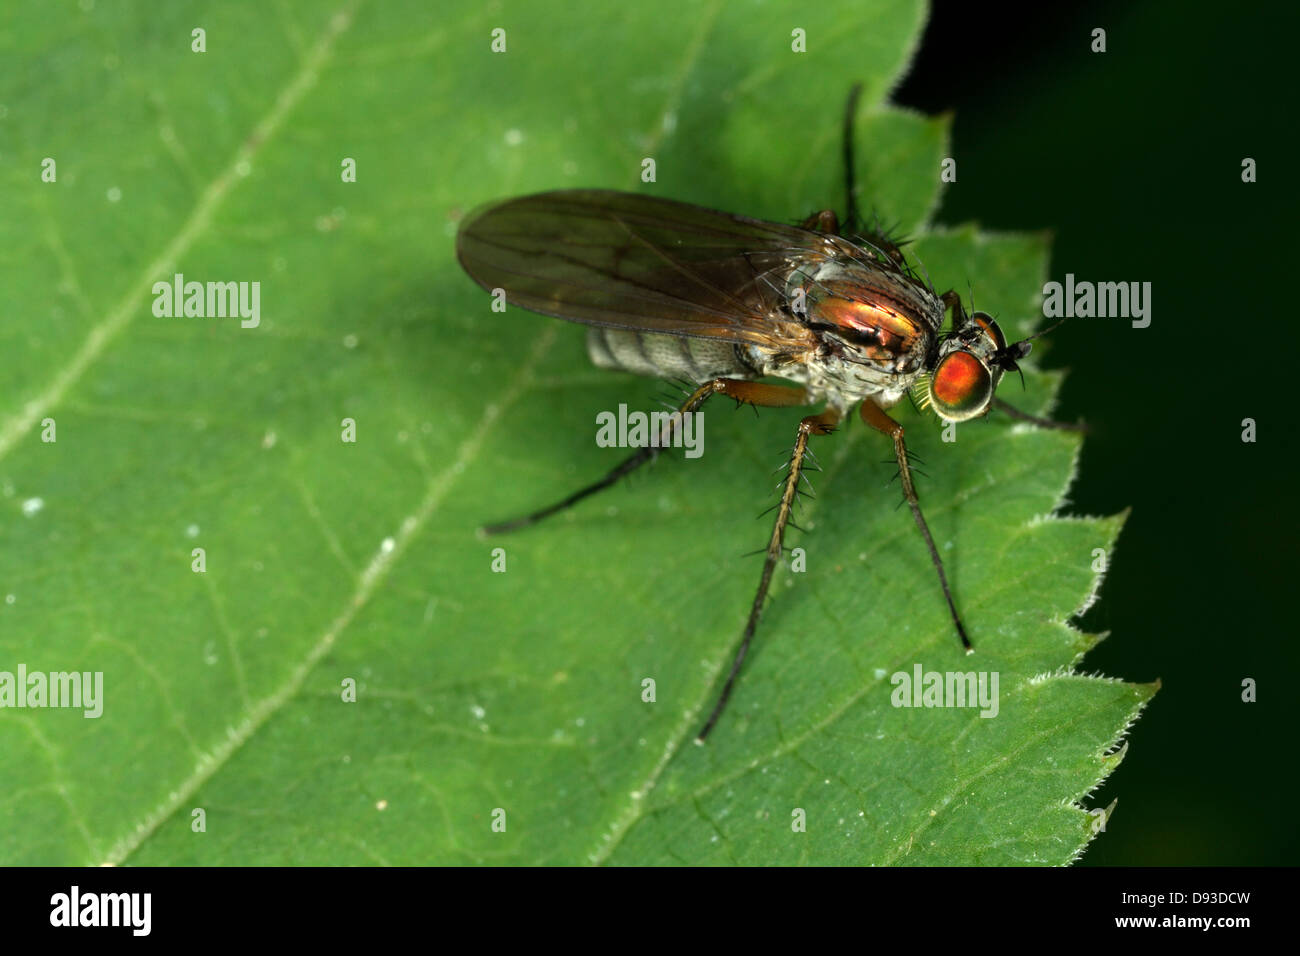 A long-legged fly, close-up, Sweden. Stock Photo